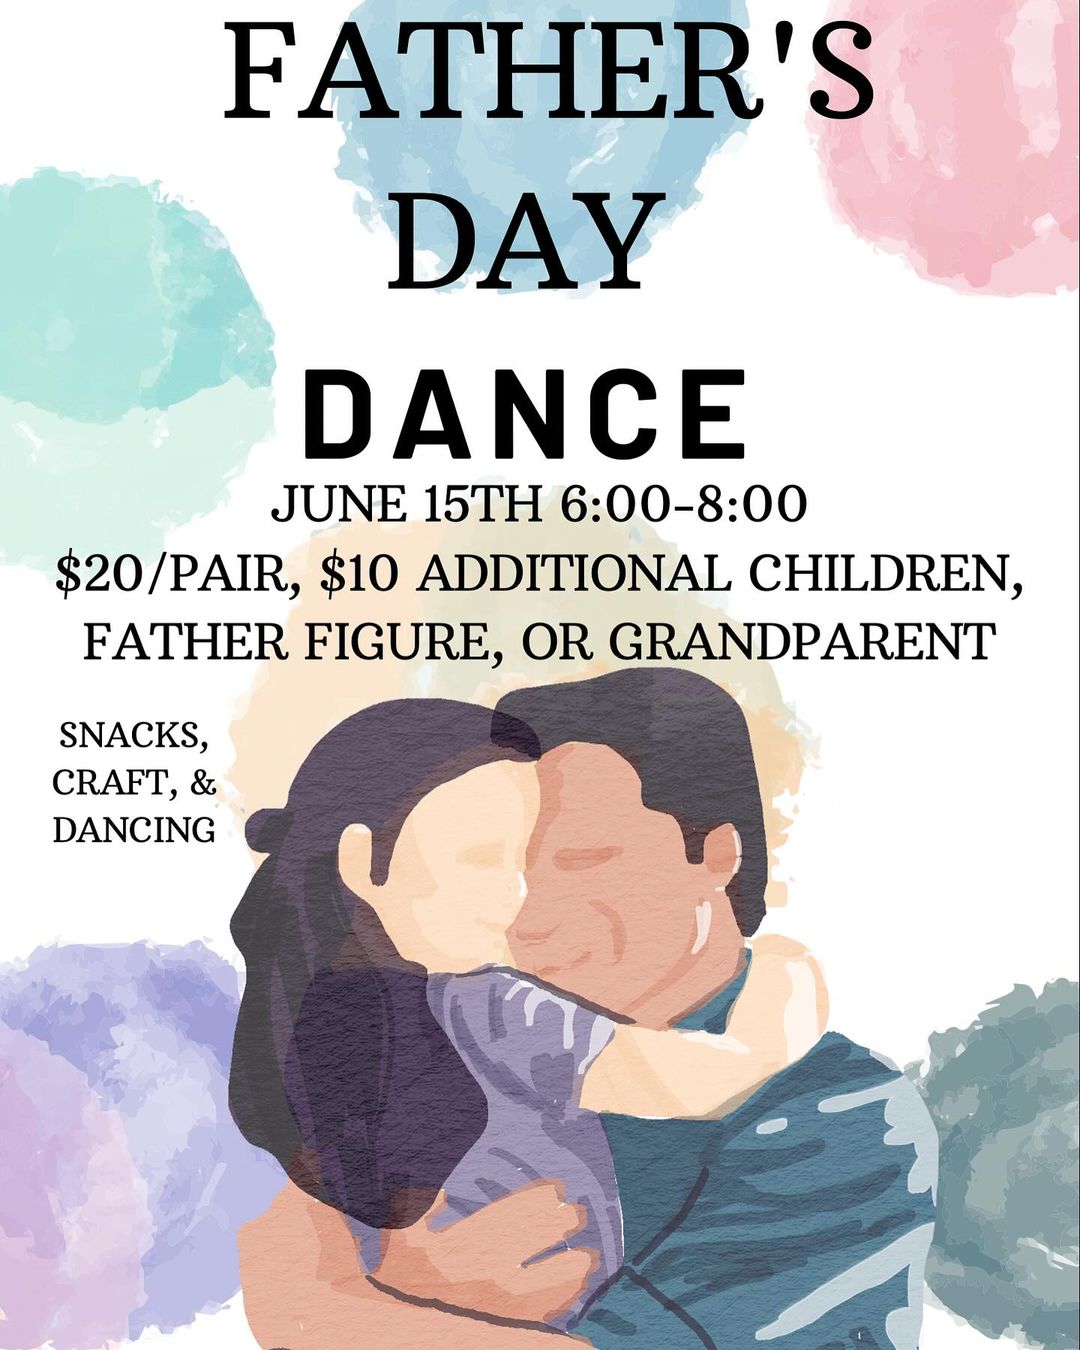 This graphic is for the Father's Day Dance.